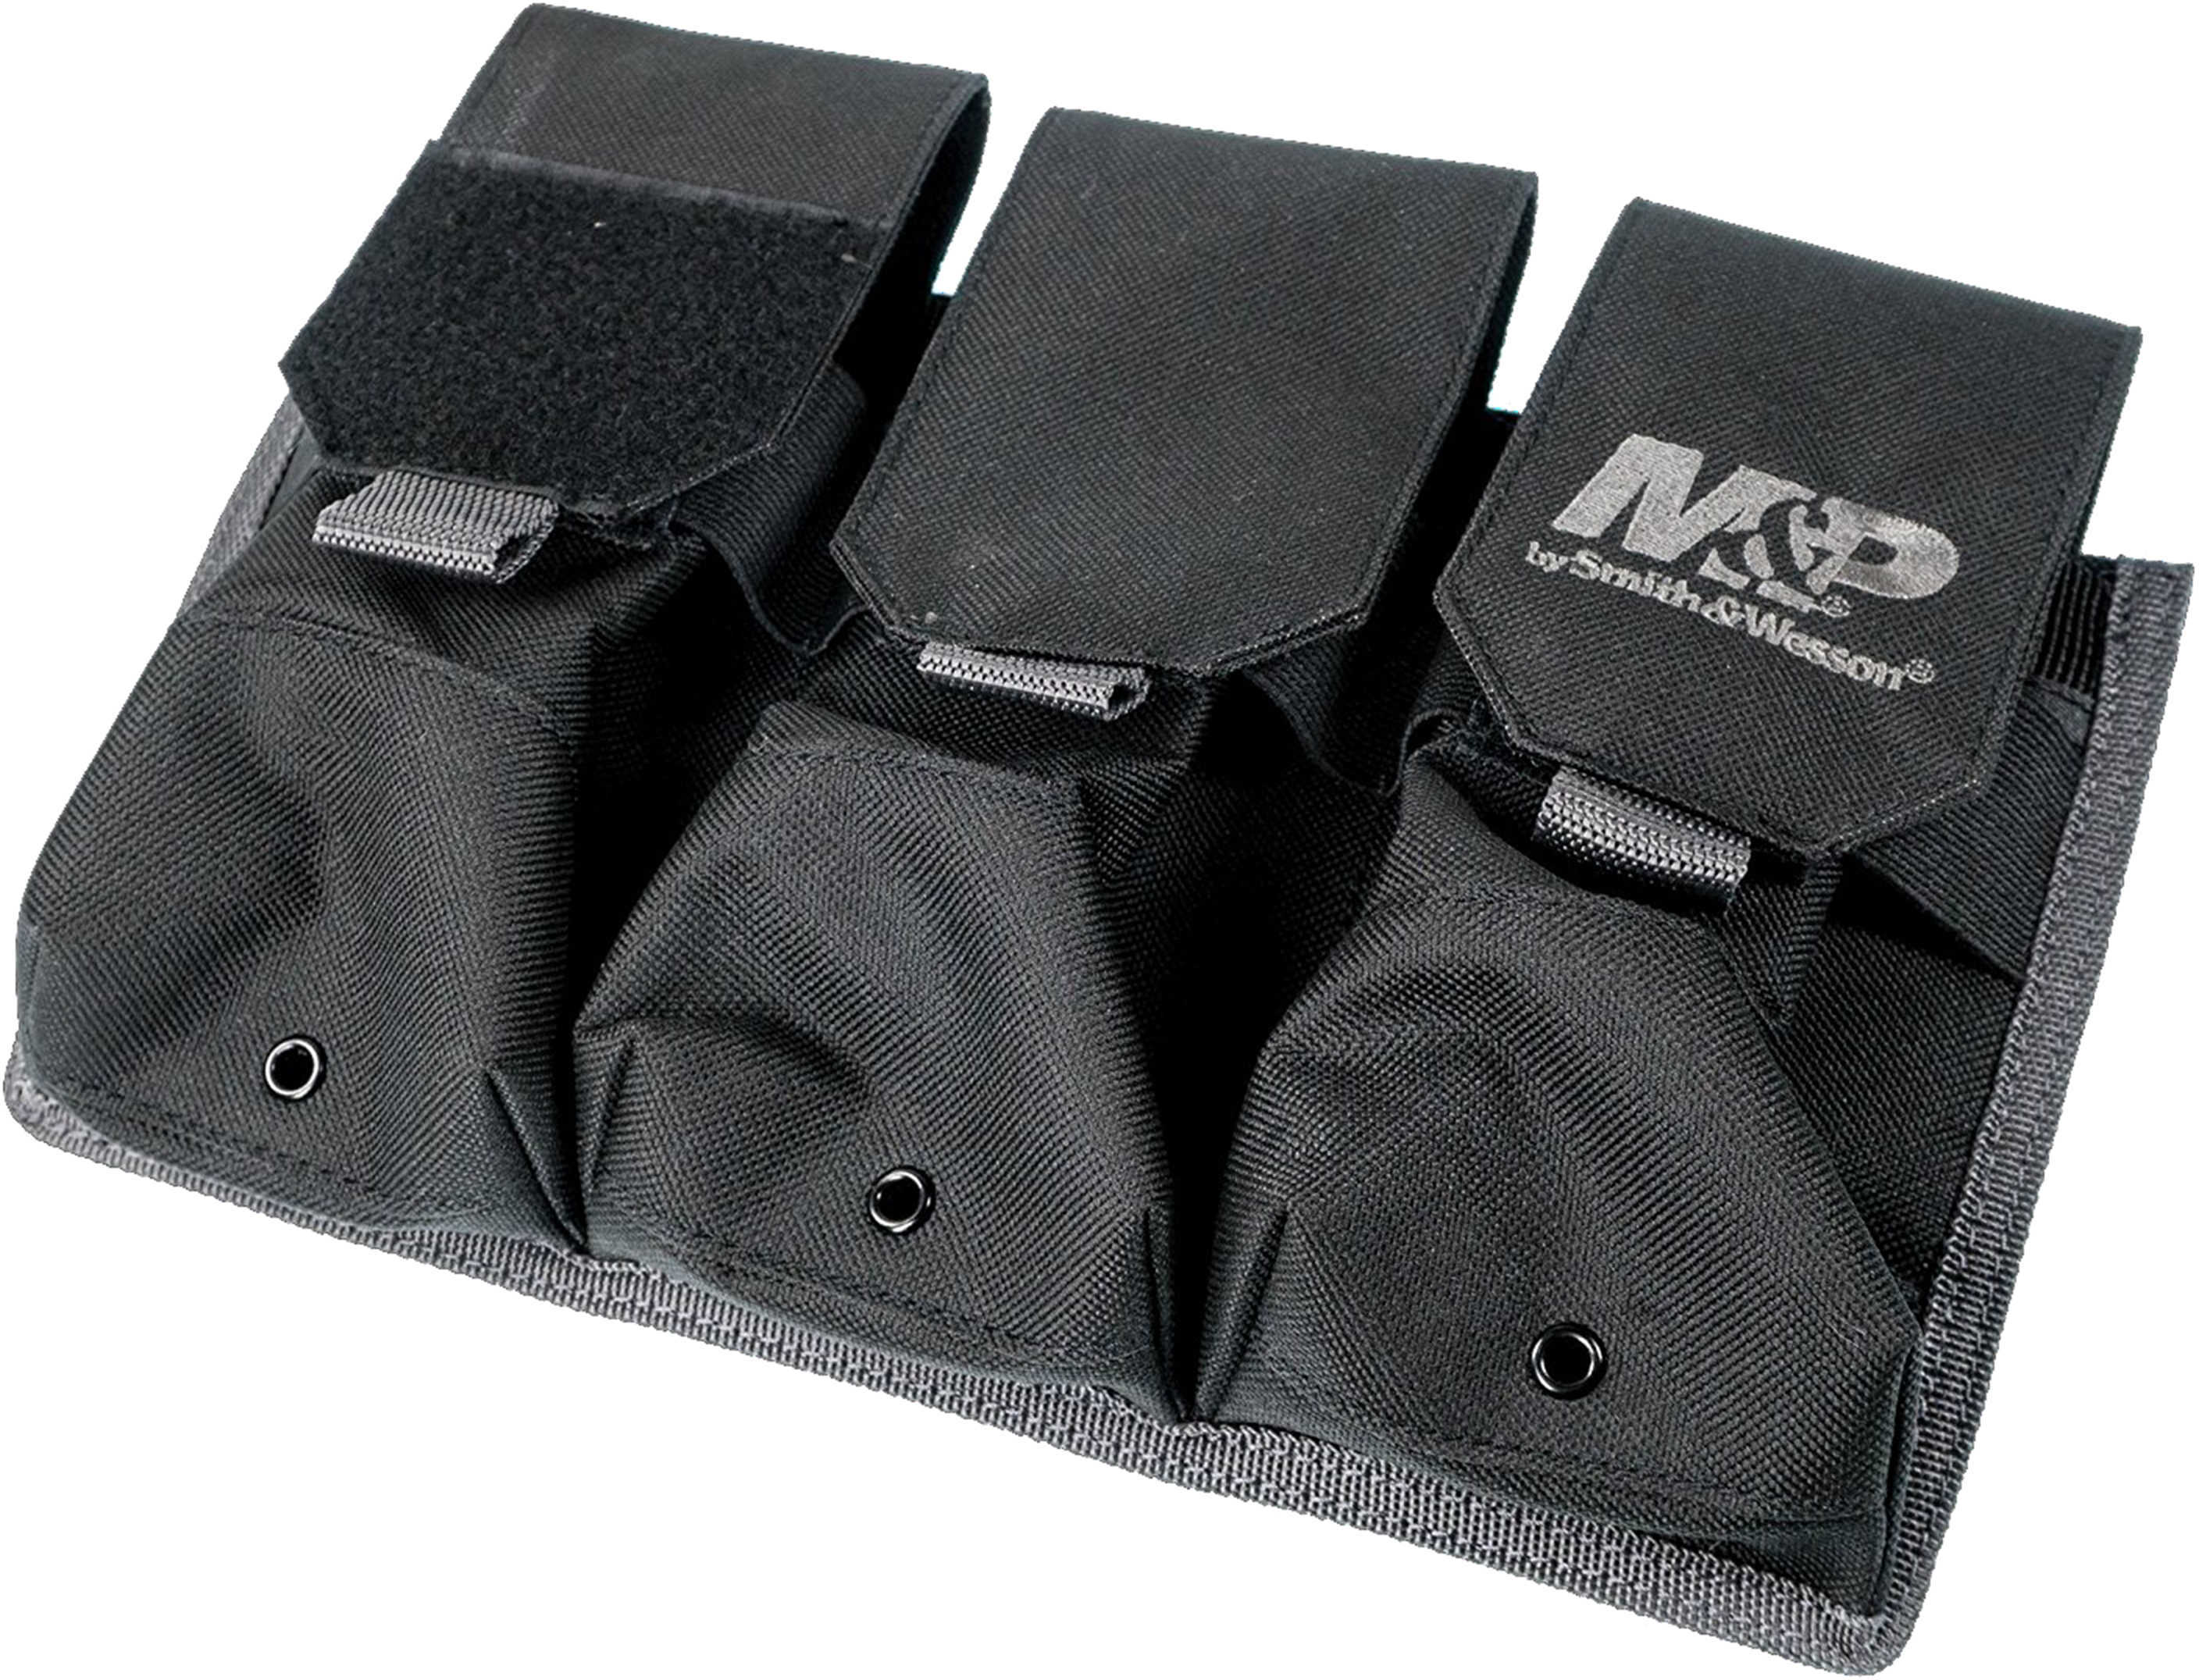 Smith & Wesson Accessories Magazine Pouch Pro Tac 3 AR/AK Md: 110267